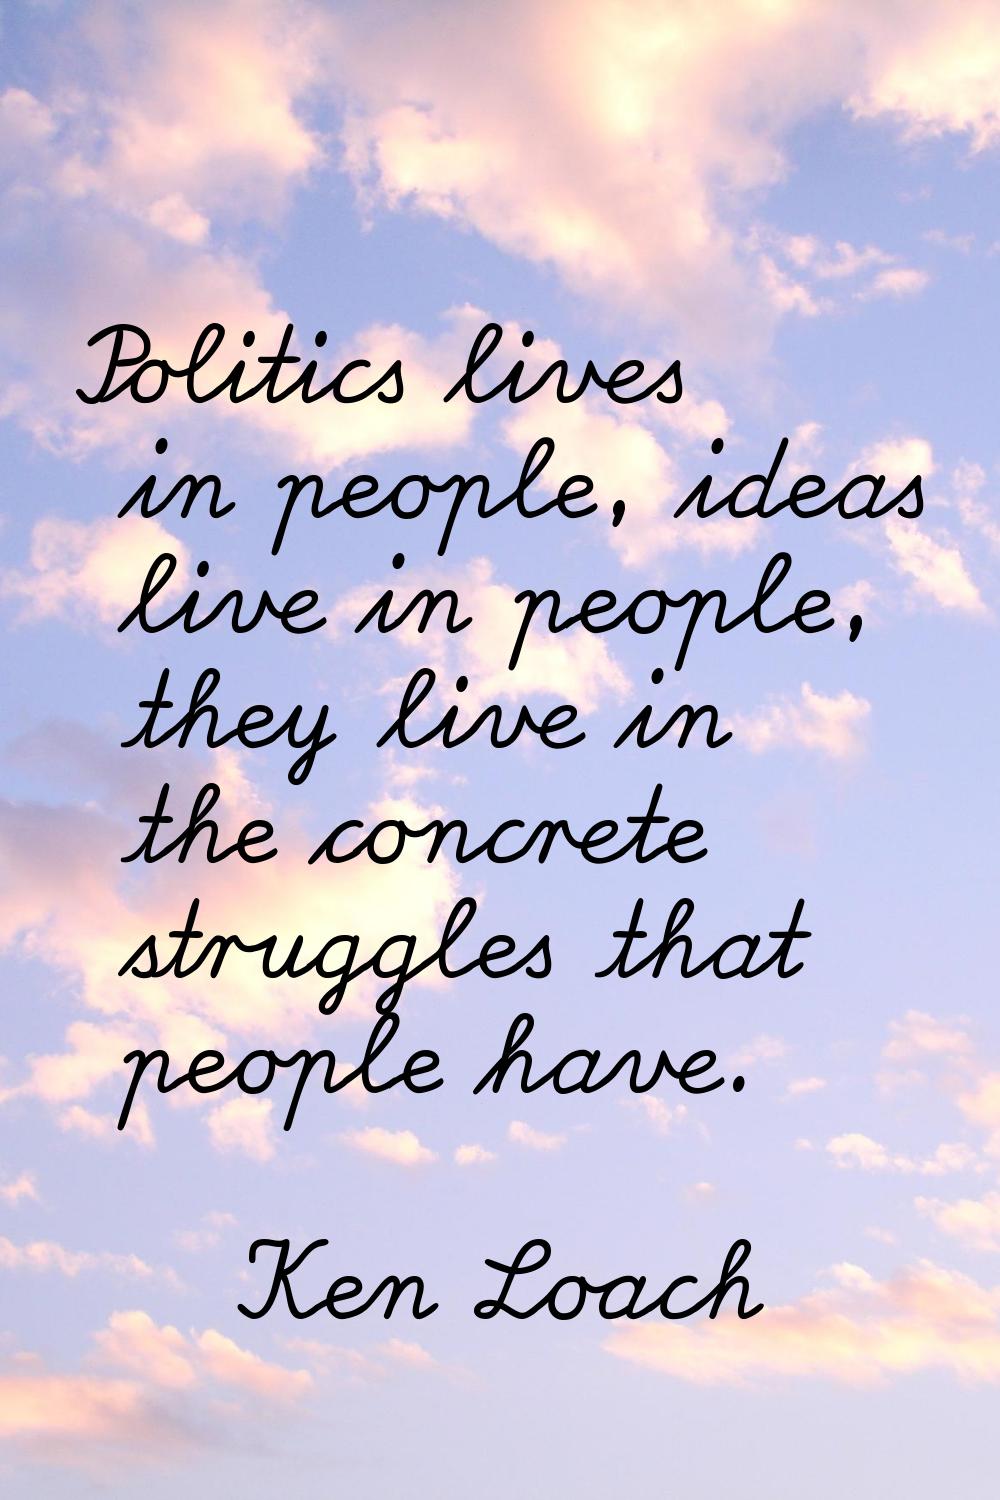 Politics lives in people, ideas live in people, they live in the concrete struggles that people hav